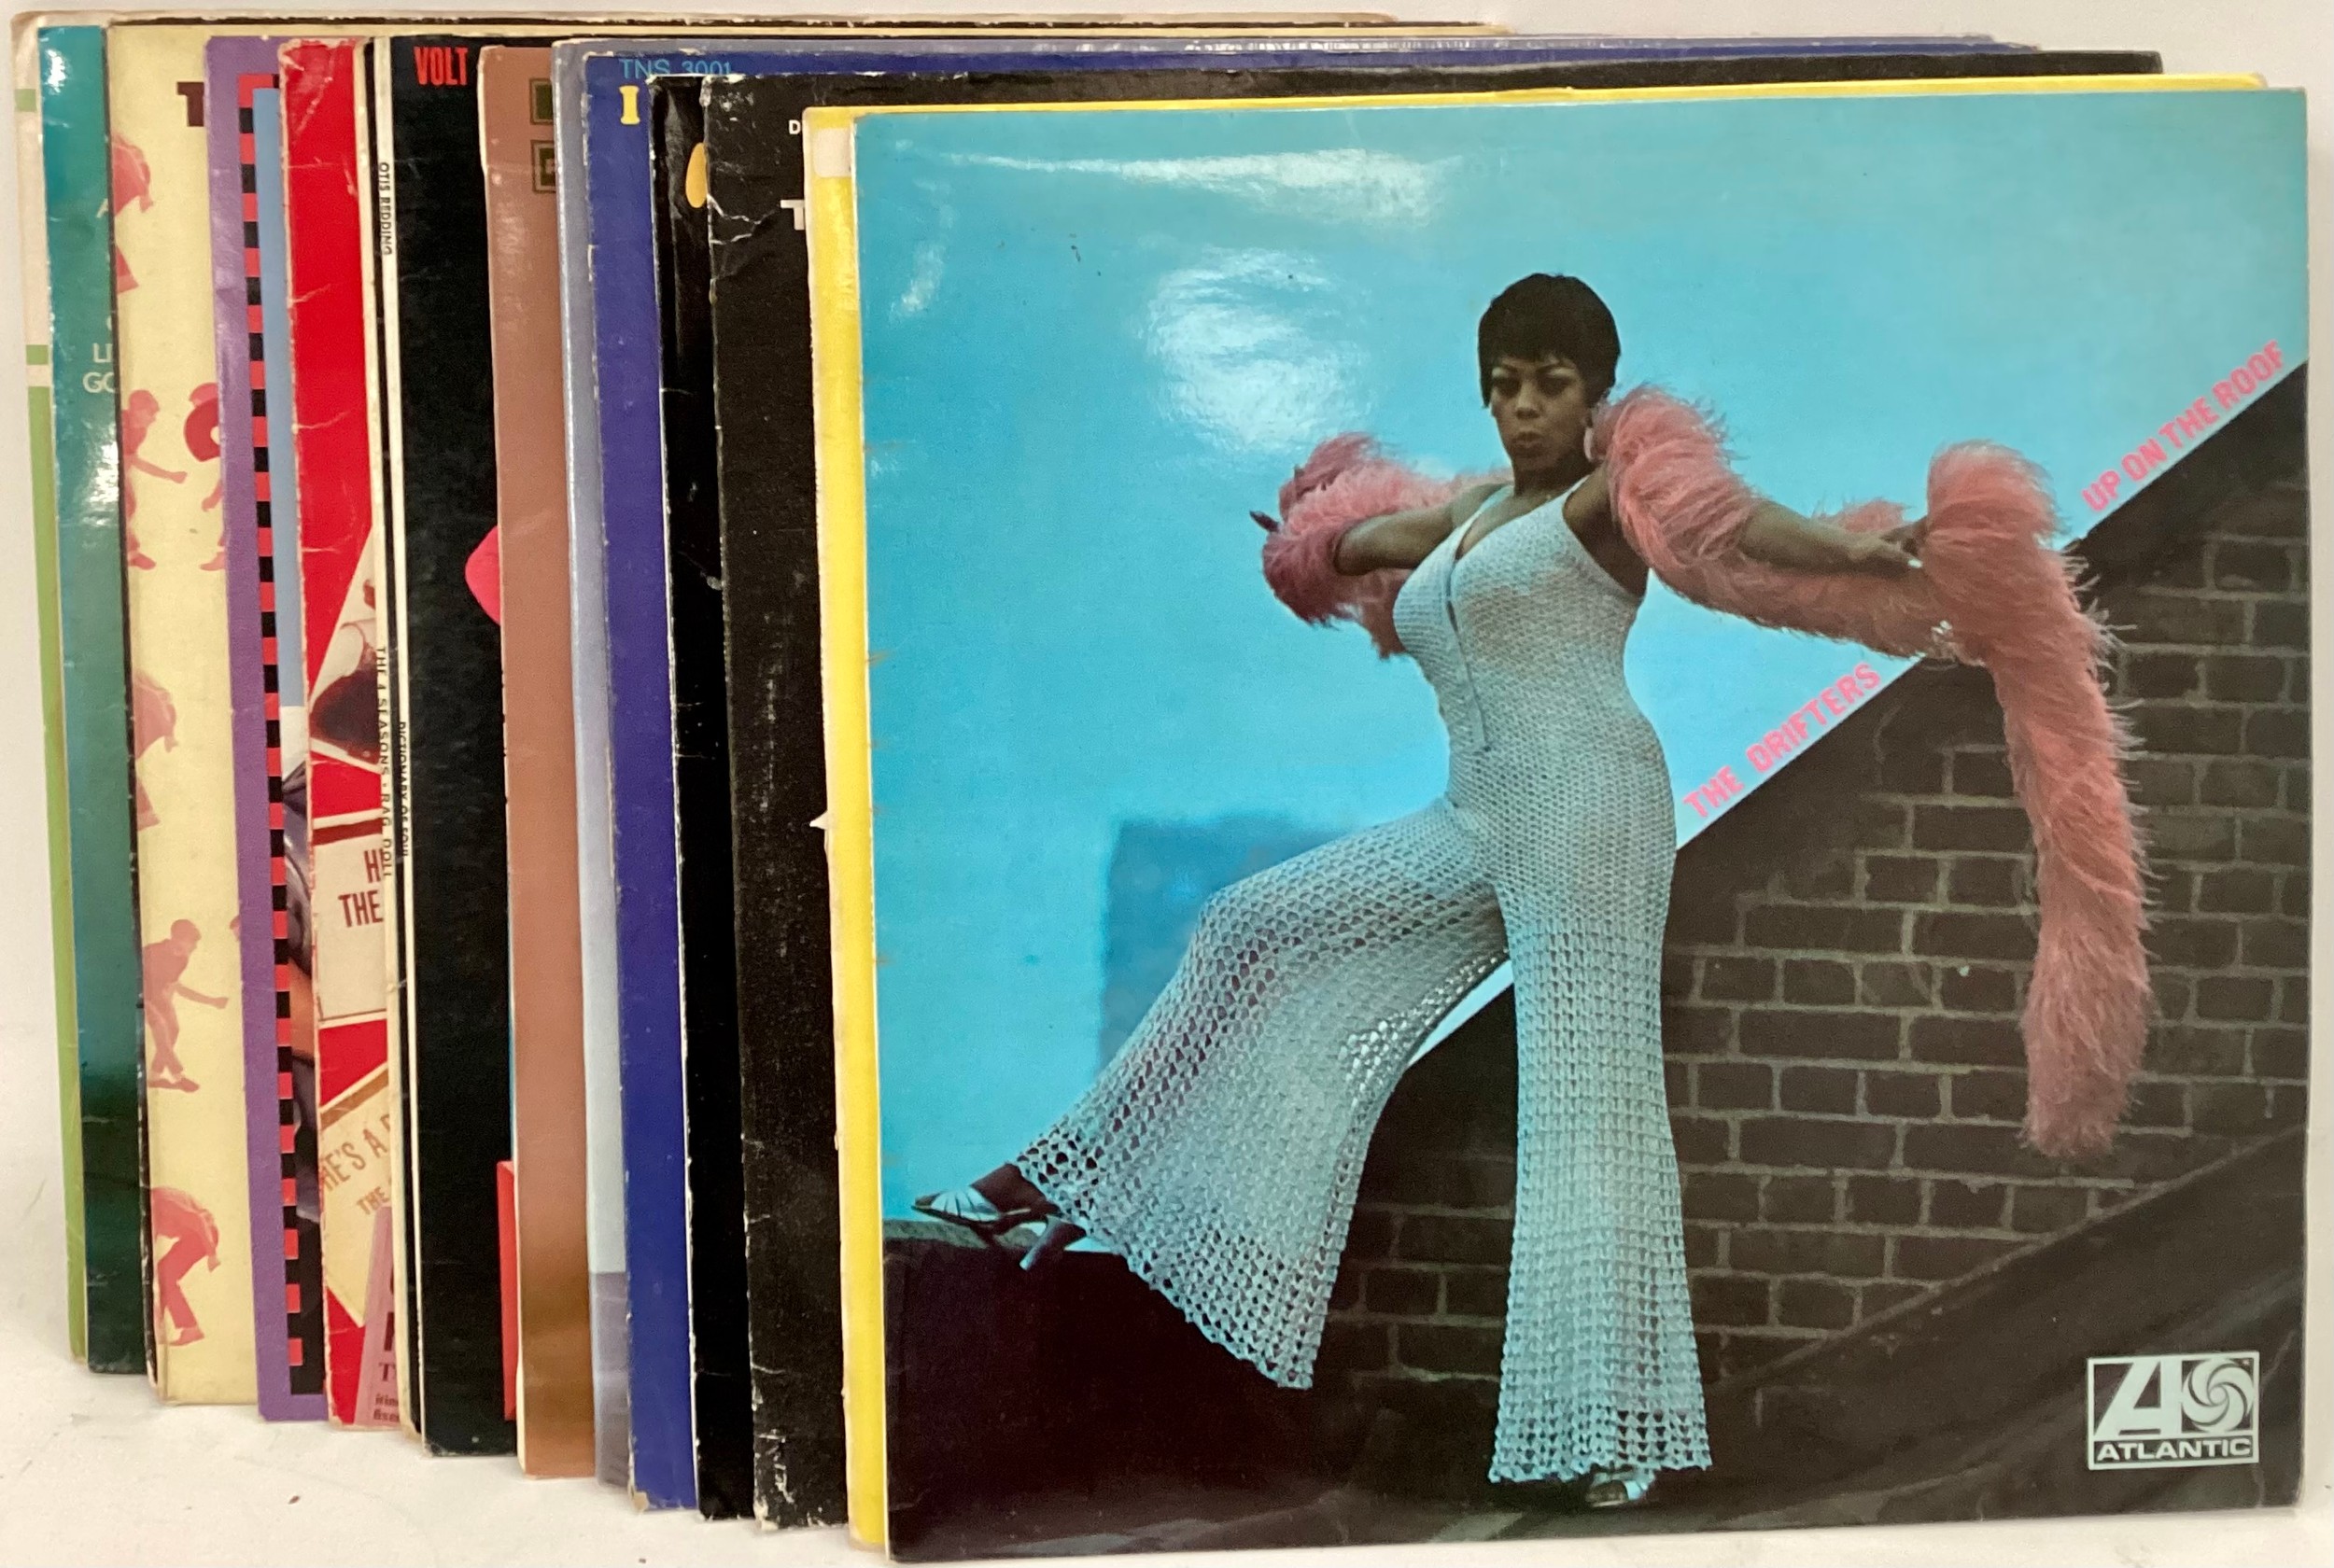 PACK OF VINYL SOUL / MOTOWN VINYL LP RECORDS. Artists here include - Isley Brothers - The Drifters -